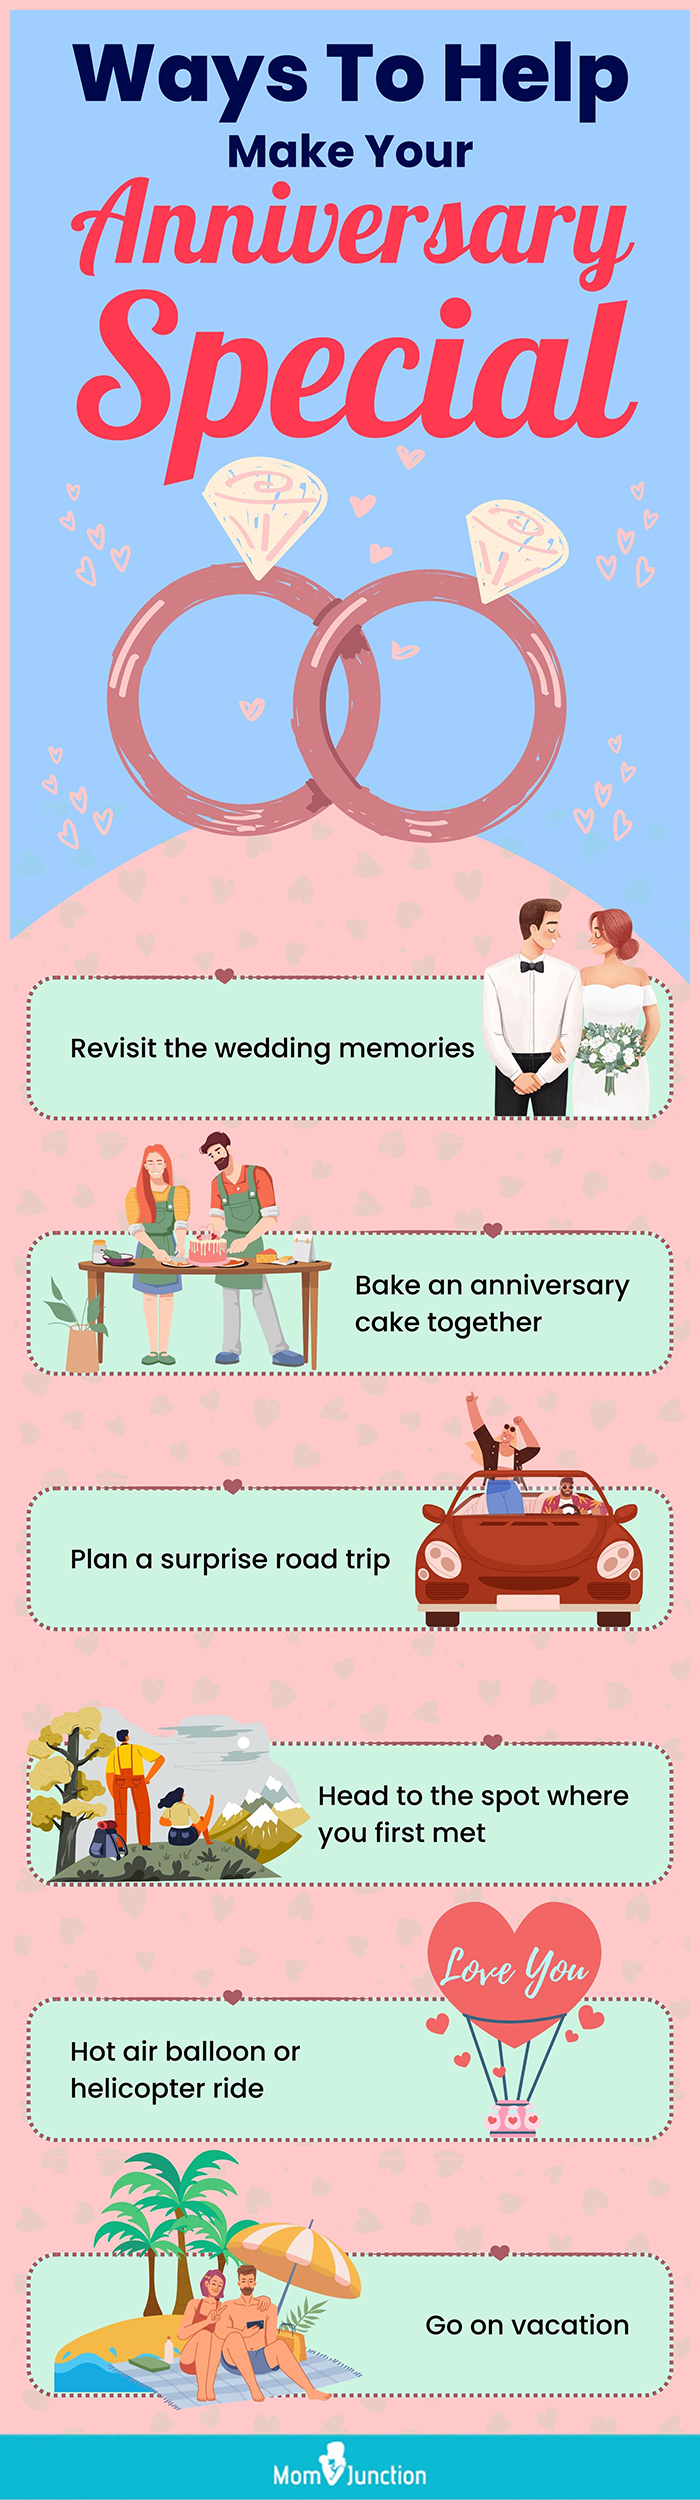 ways to help make your anniversary special [infographic]